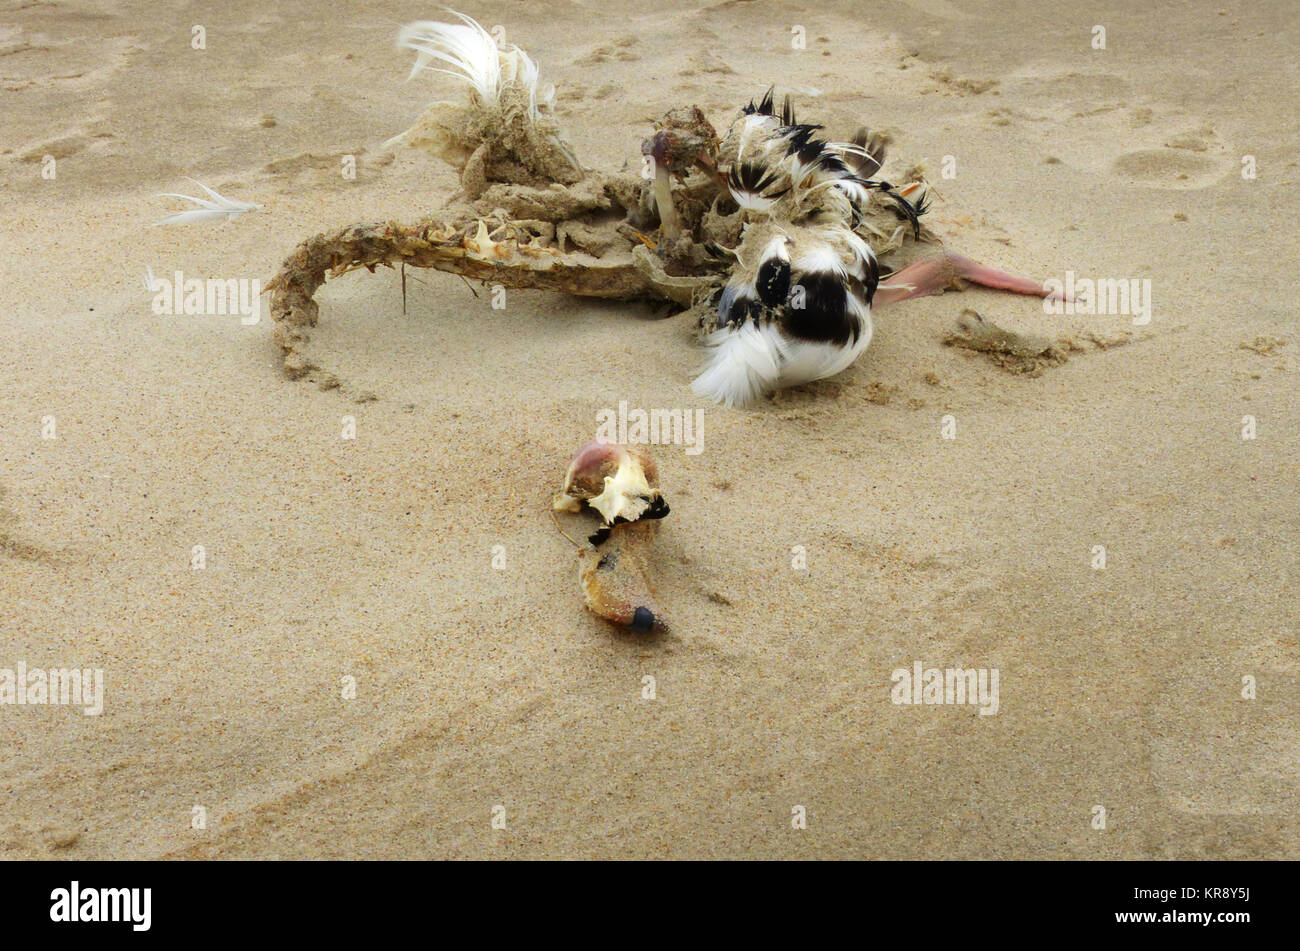 cooking and corpse of a bird on the beach Stock Photo